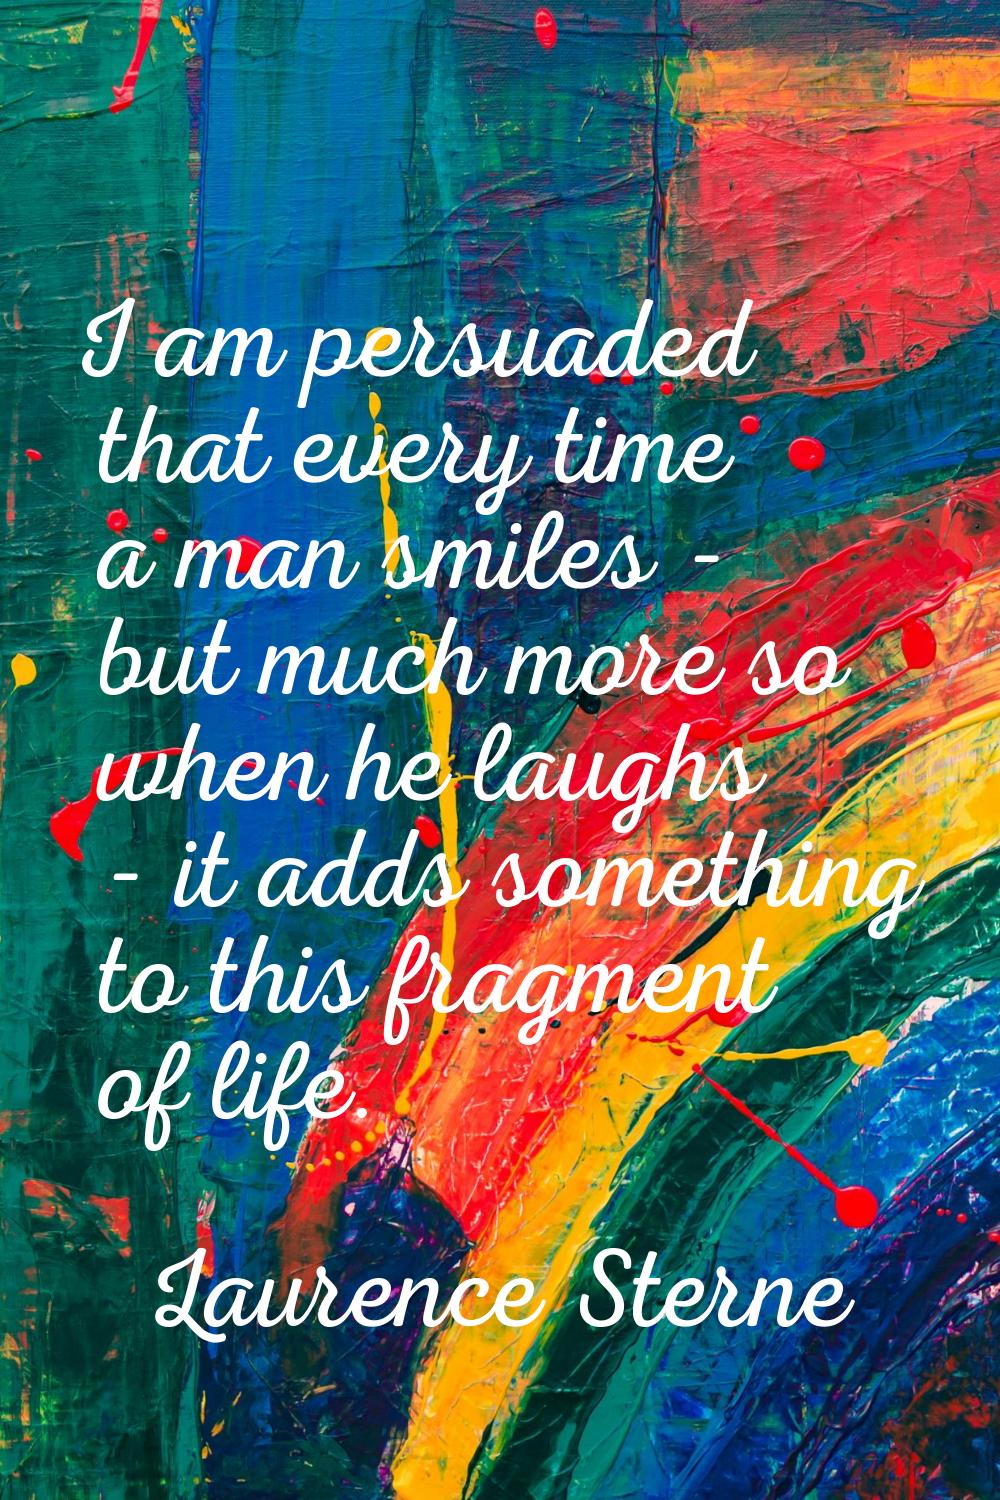 I am persuaded that every time a man smiles - but much more so when he laughs - it adds something t